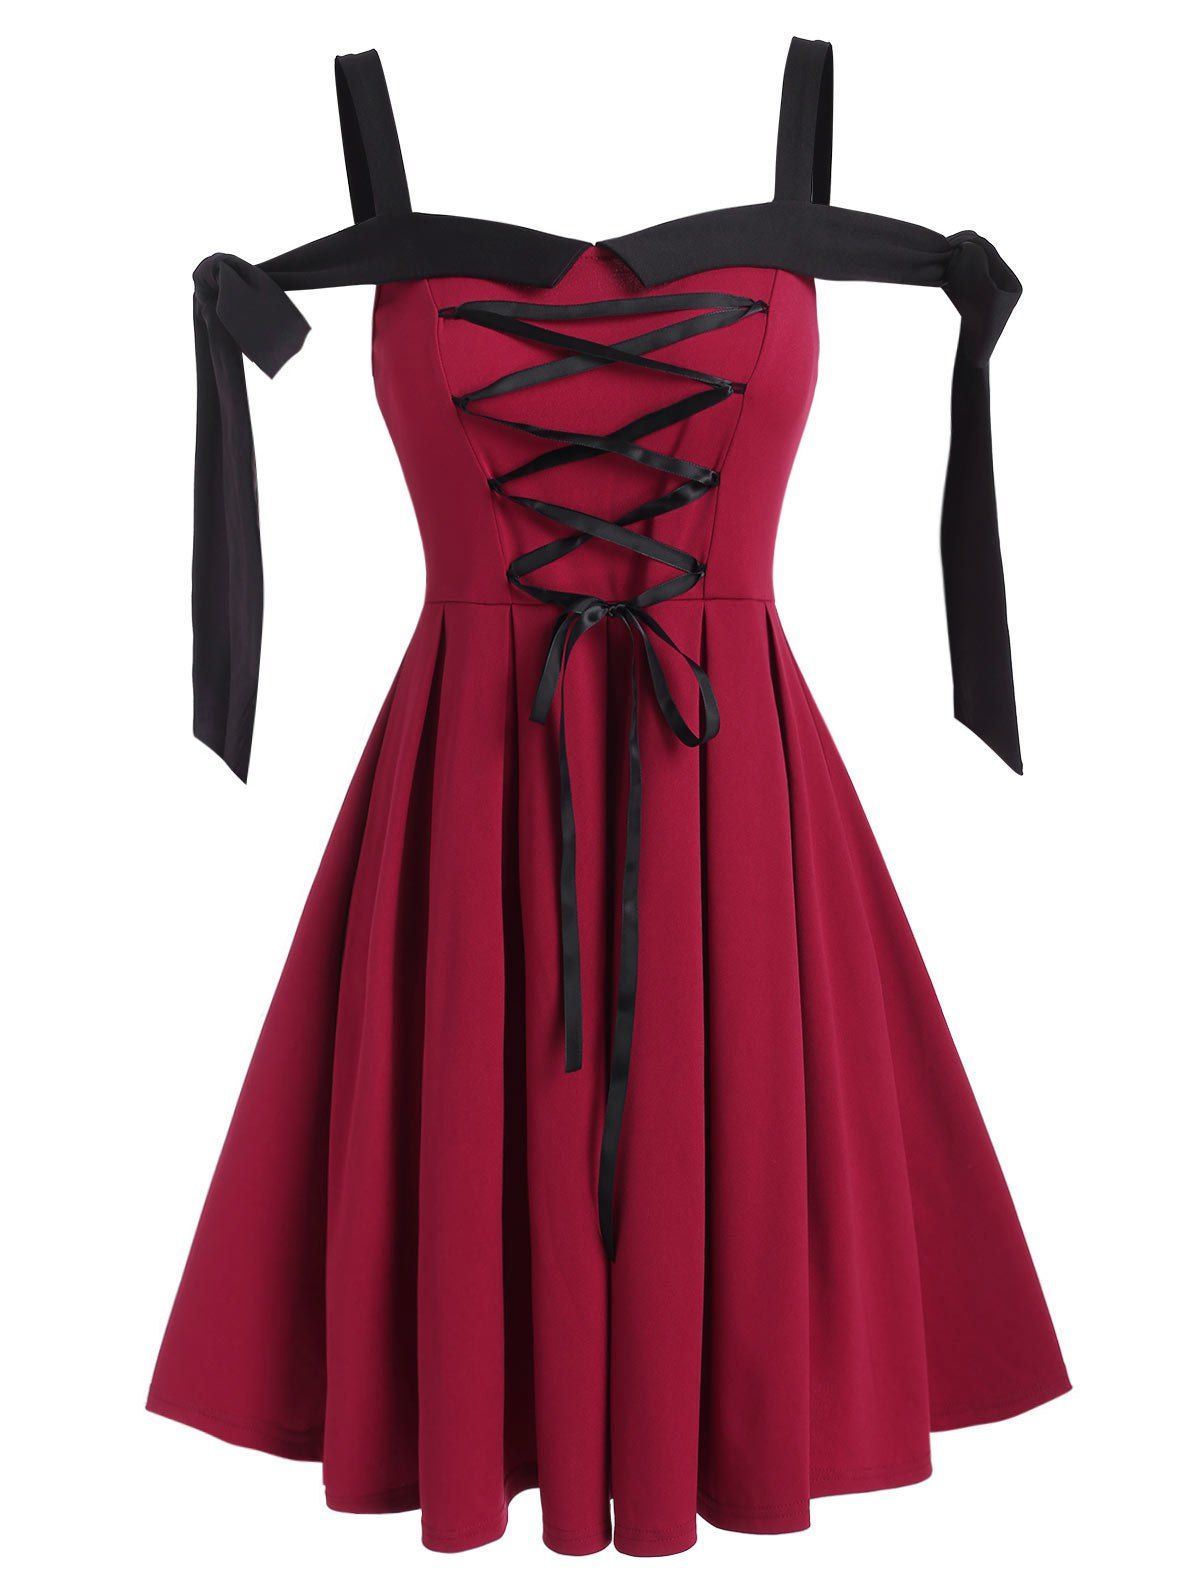 Cold Shoulder Knot Lace-up Front Pleated Dress - RED WINE L